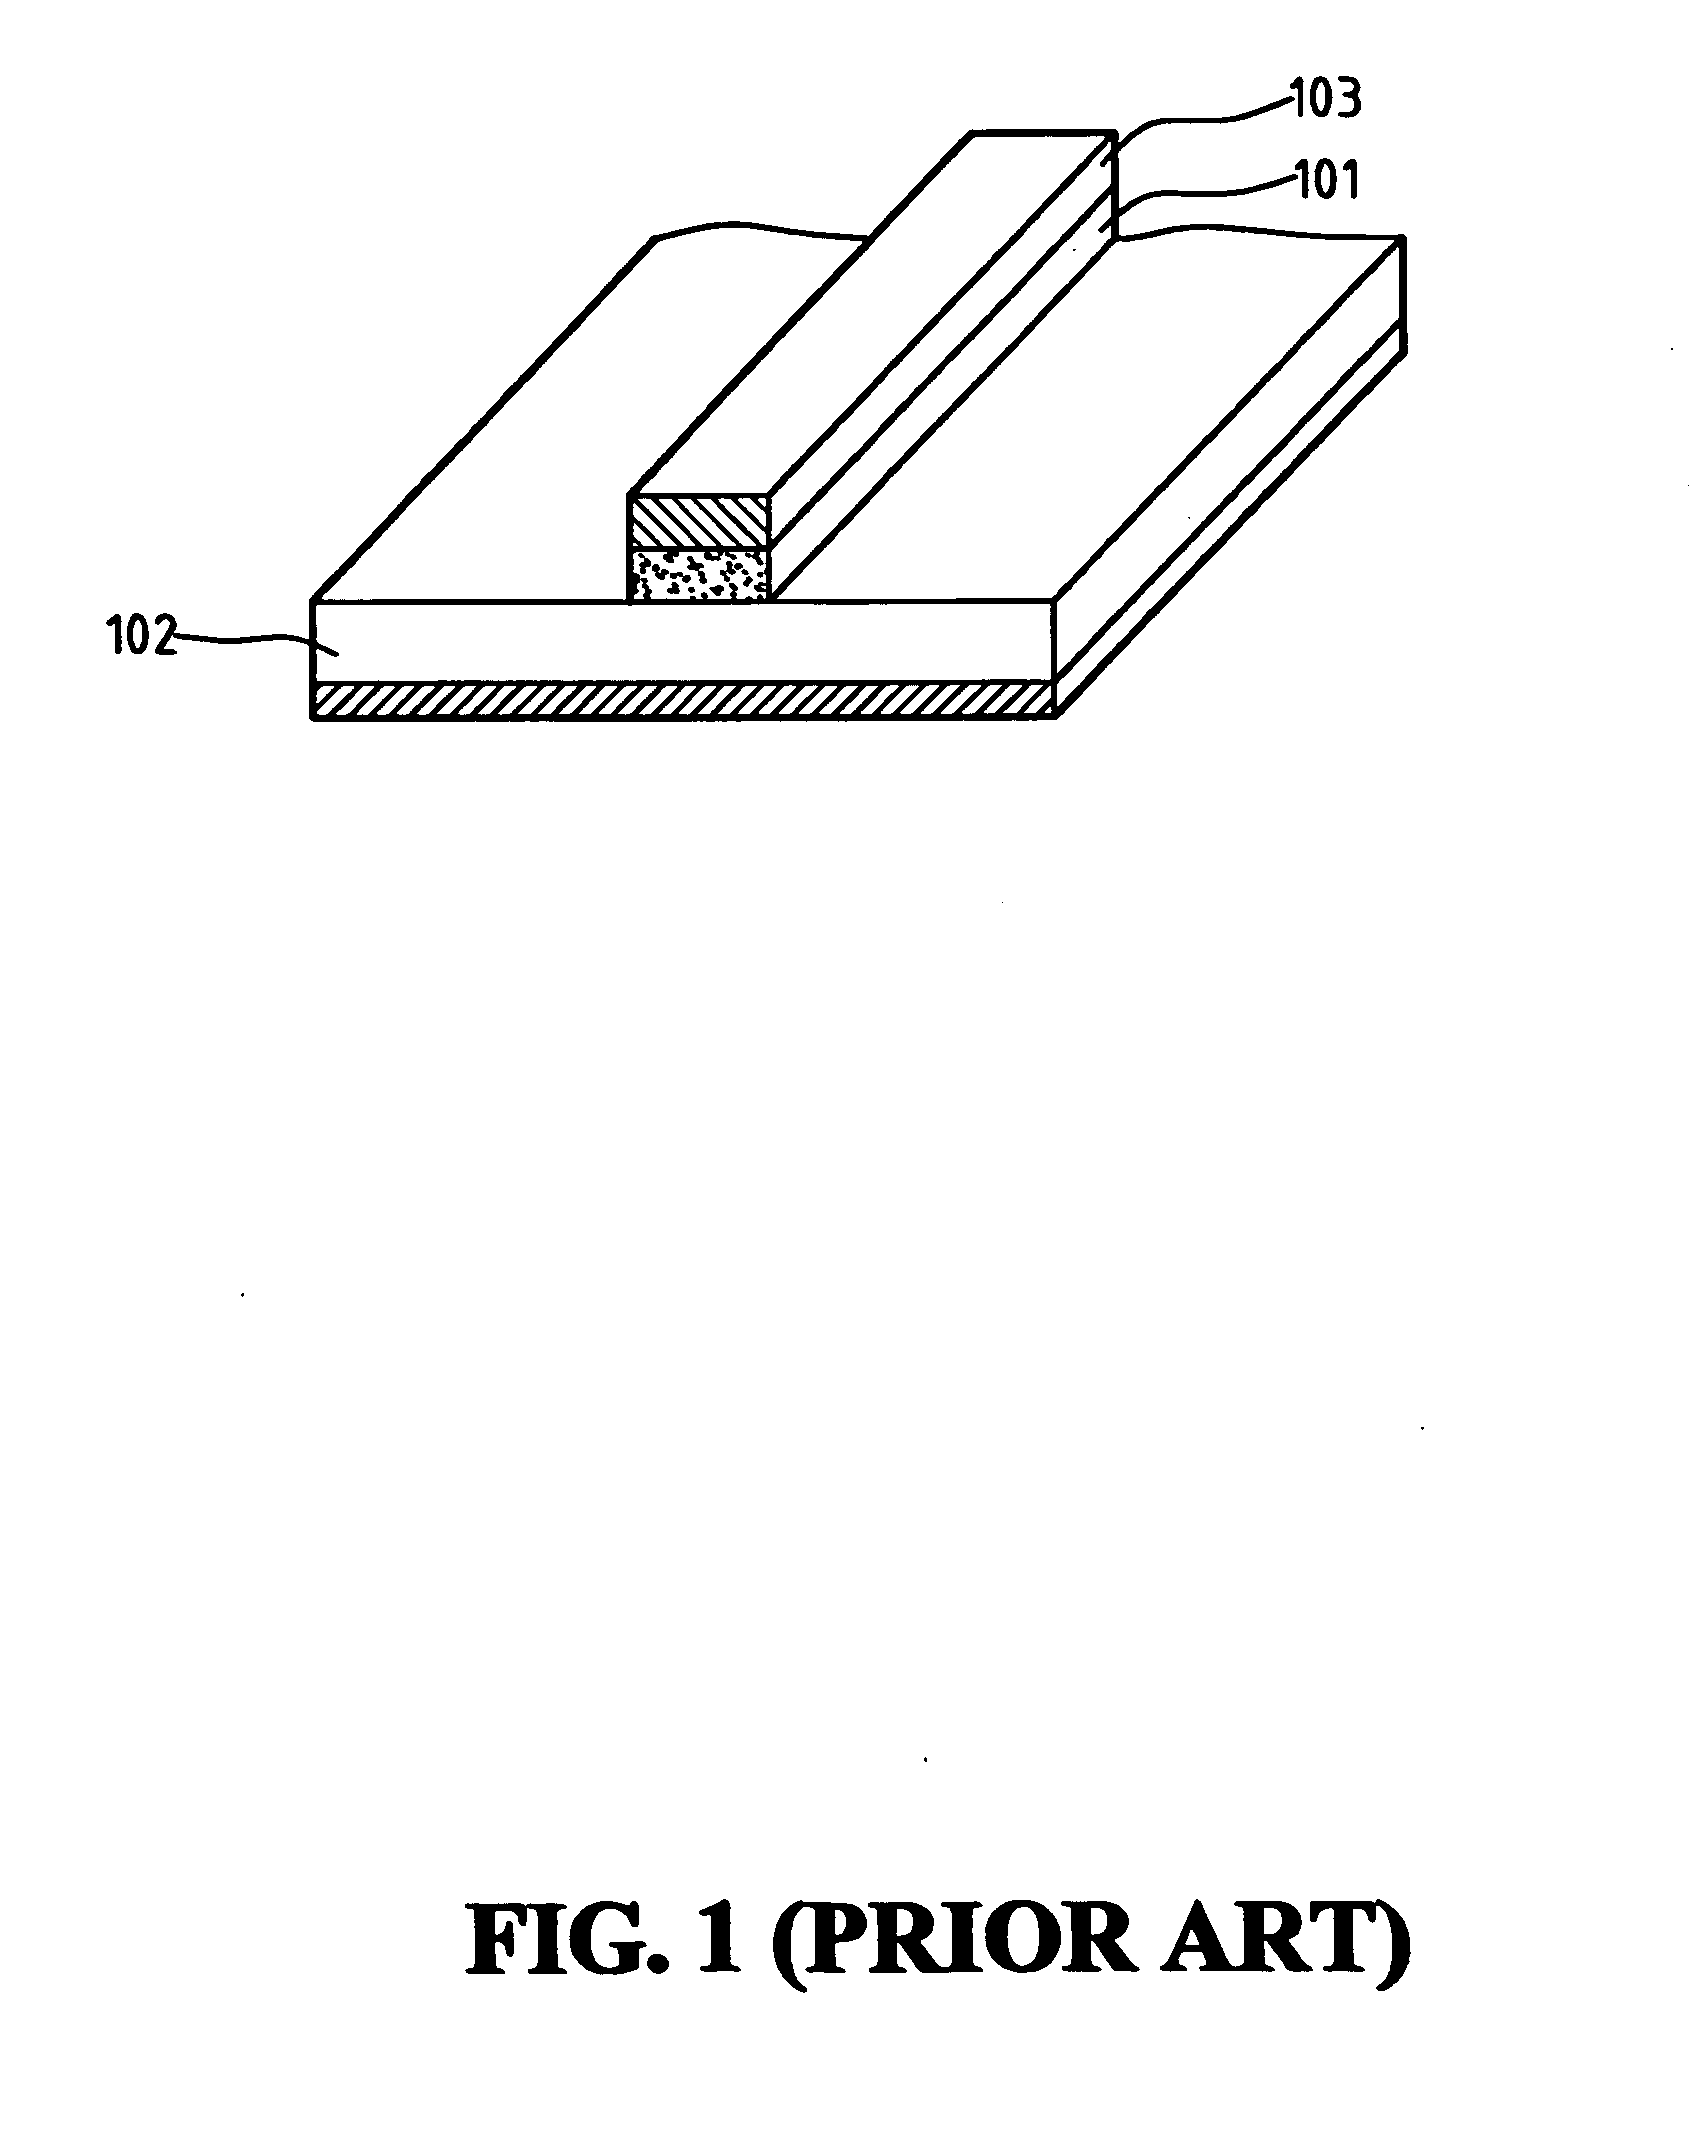 Composite distributed dielectric structure